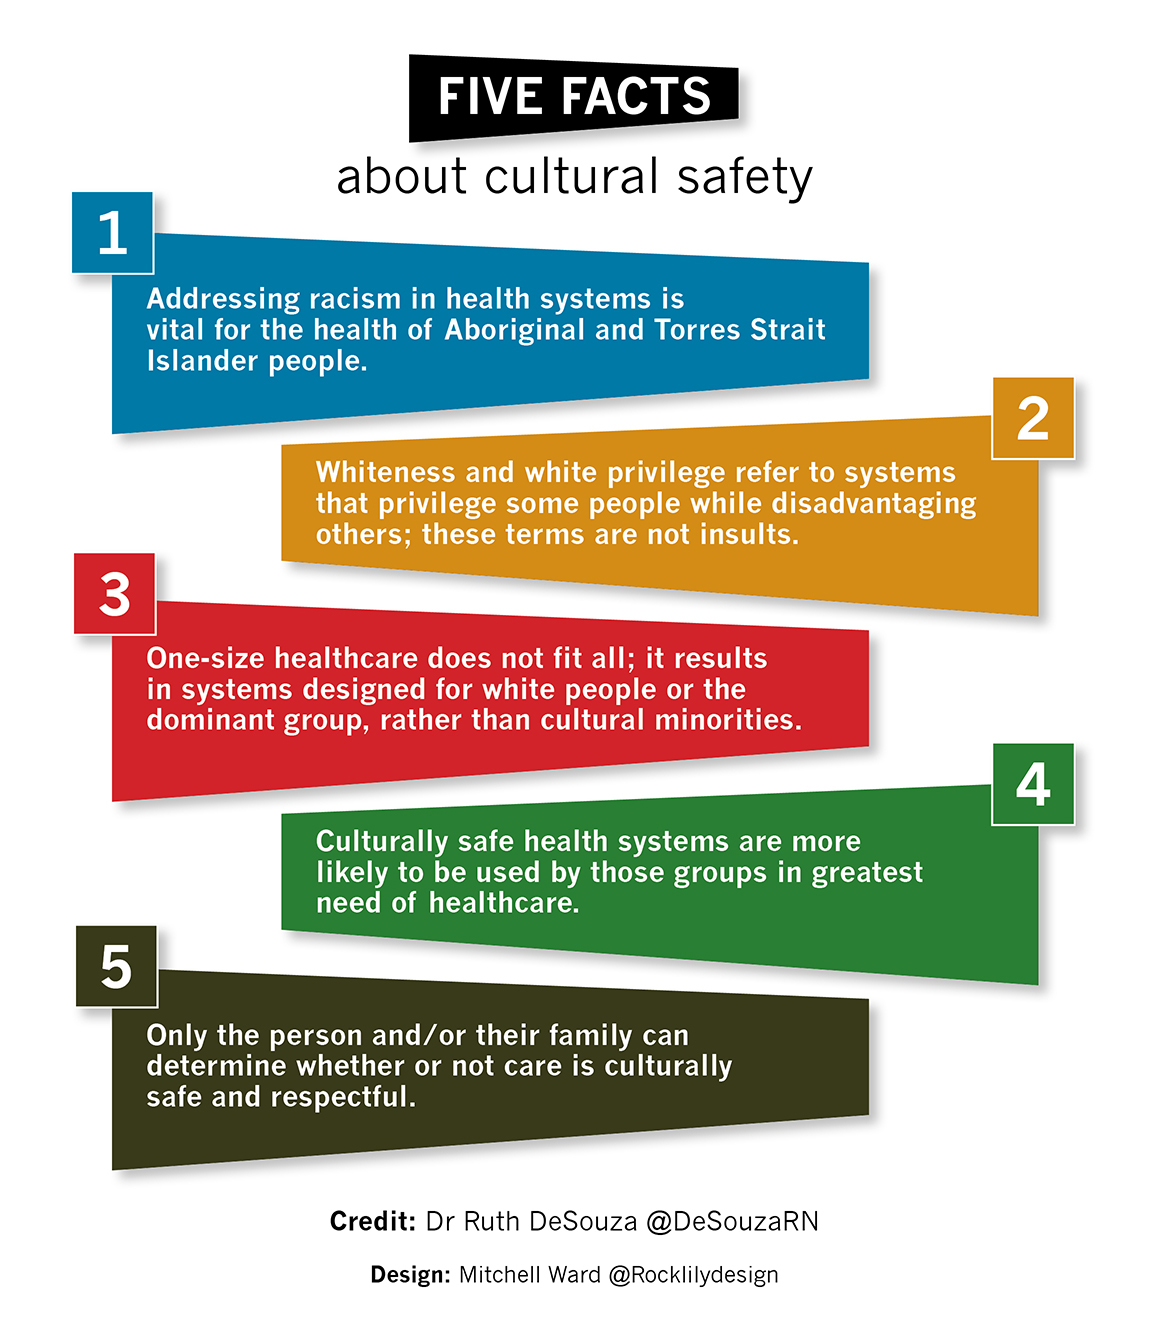 Five myths about cultural safety